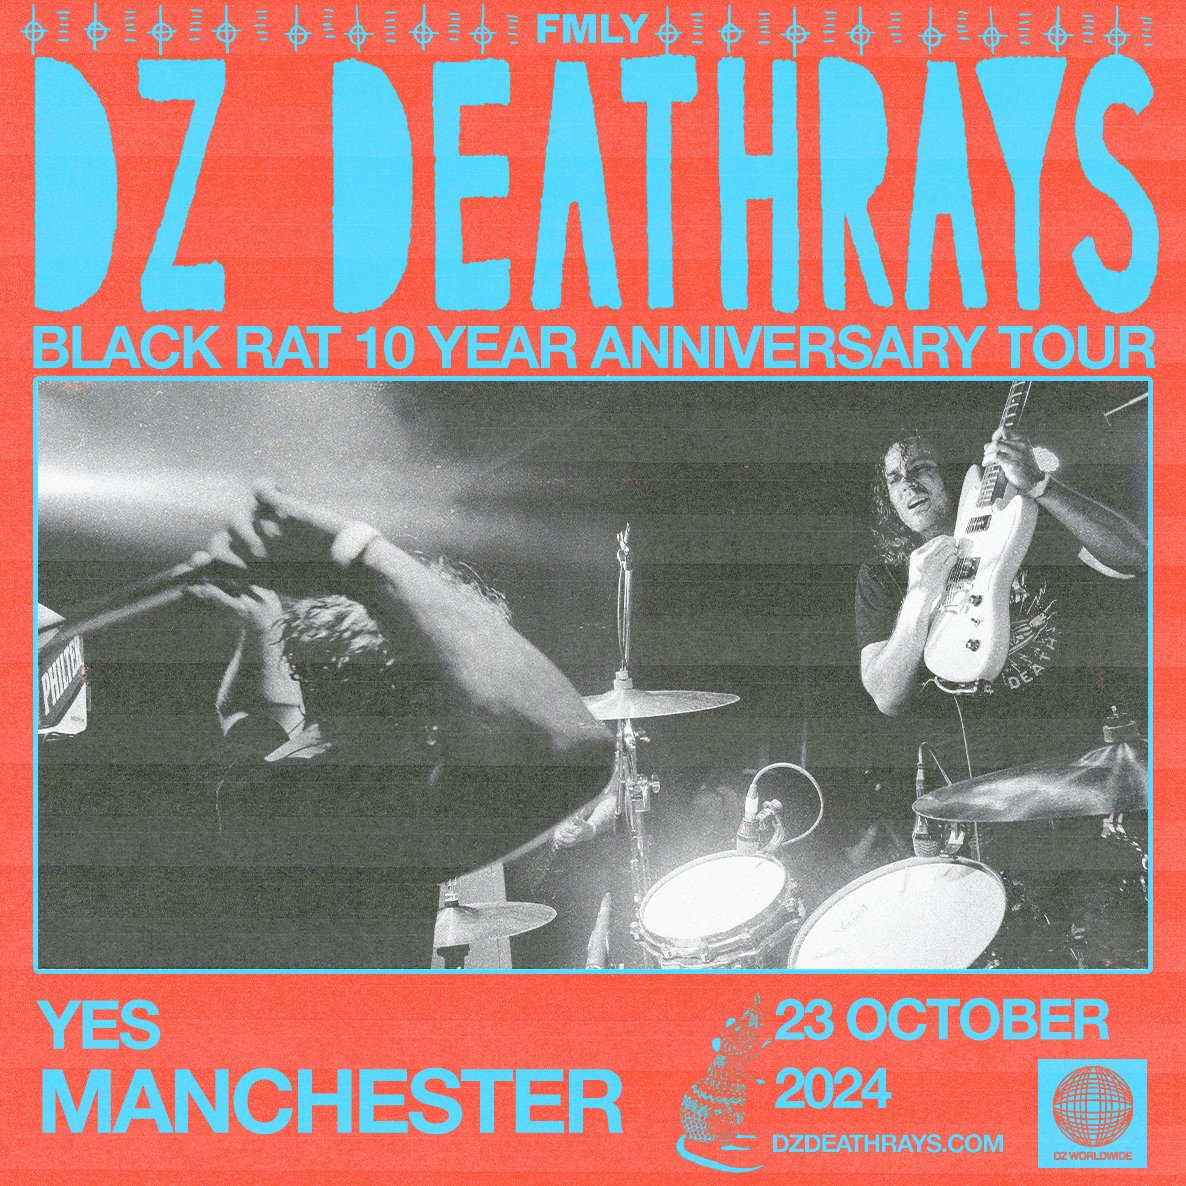 ON SALE NOW... @DZDEATHRAYS celebrate the 10th anniversary of their cult record 'Black Rat' at YES on October 23rd Tickets available here -> seetickets.com/event/dz-death…